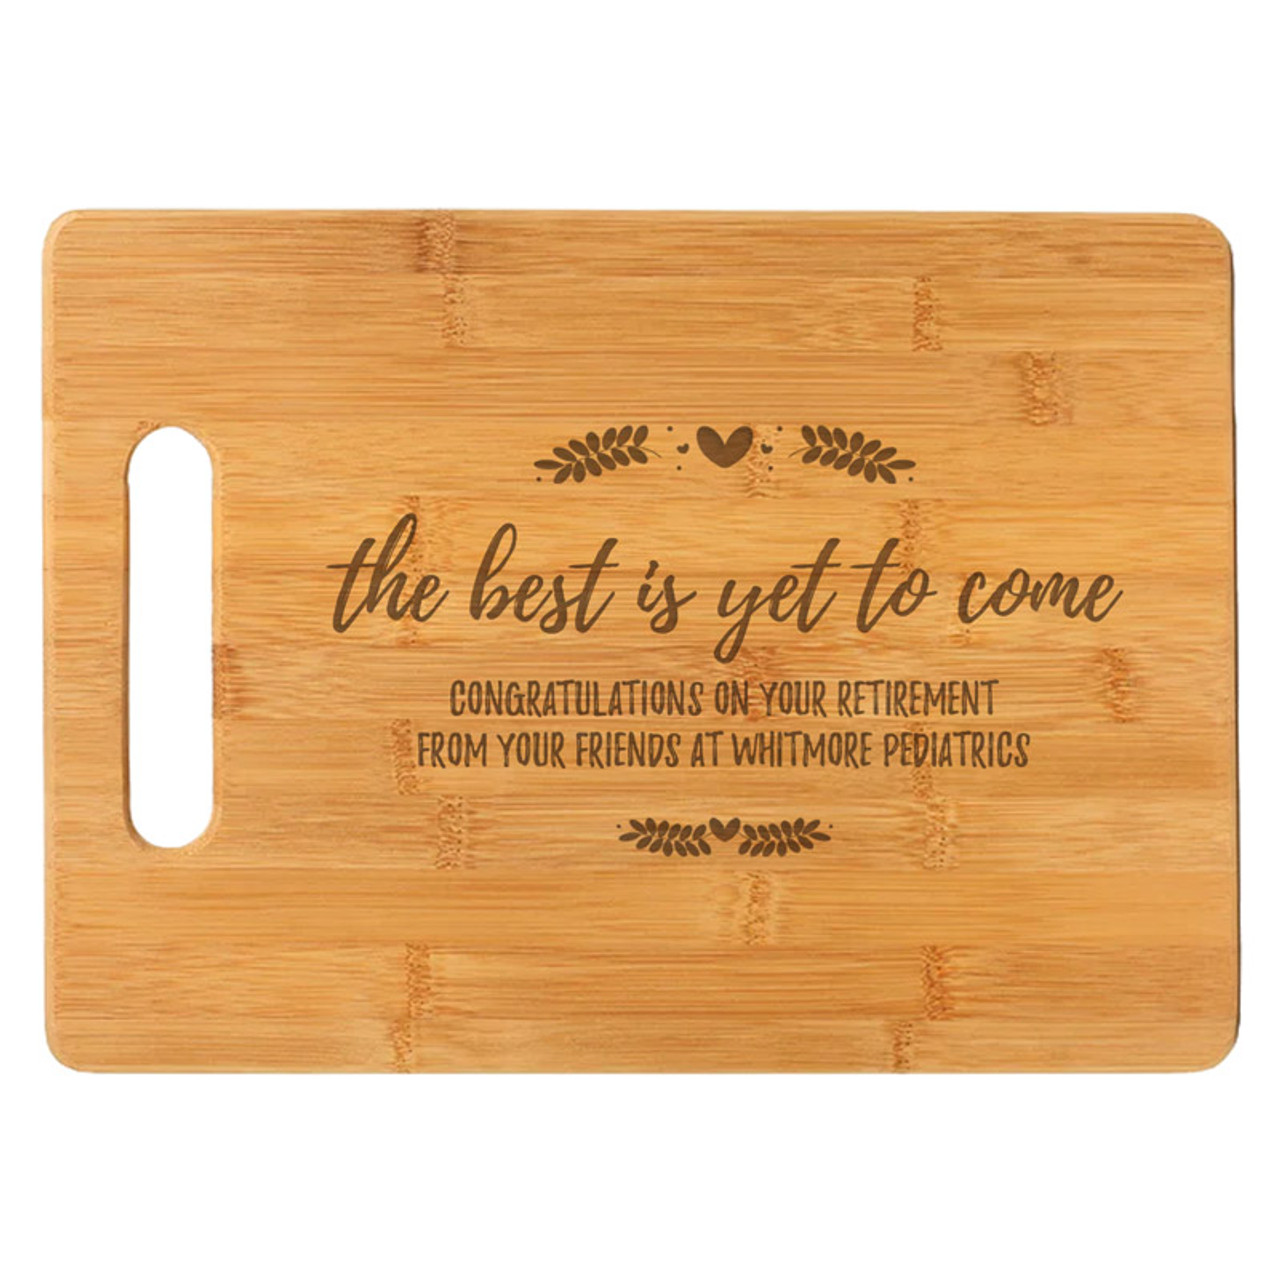 https://cdn11.bigcommerce.com/s-d22a0/images/stencil/1280x1280/products/2255/12213/personalized-cutting-board-retirement-gift-floral-CTB427__09717.1656354181.jpg?c=2